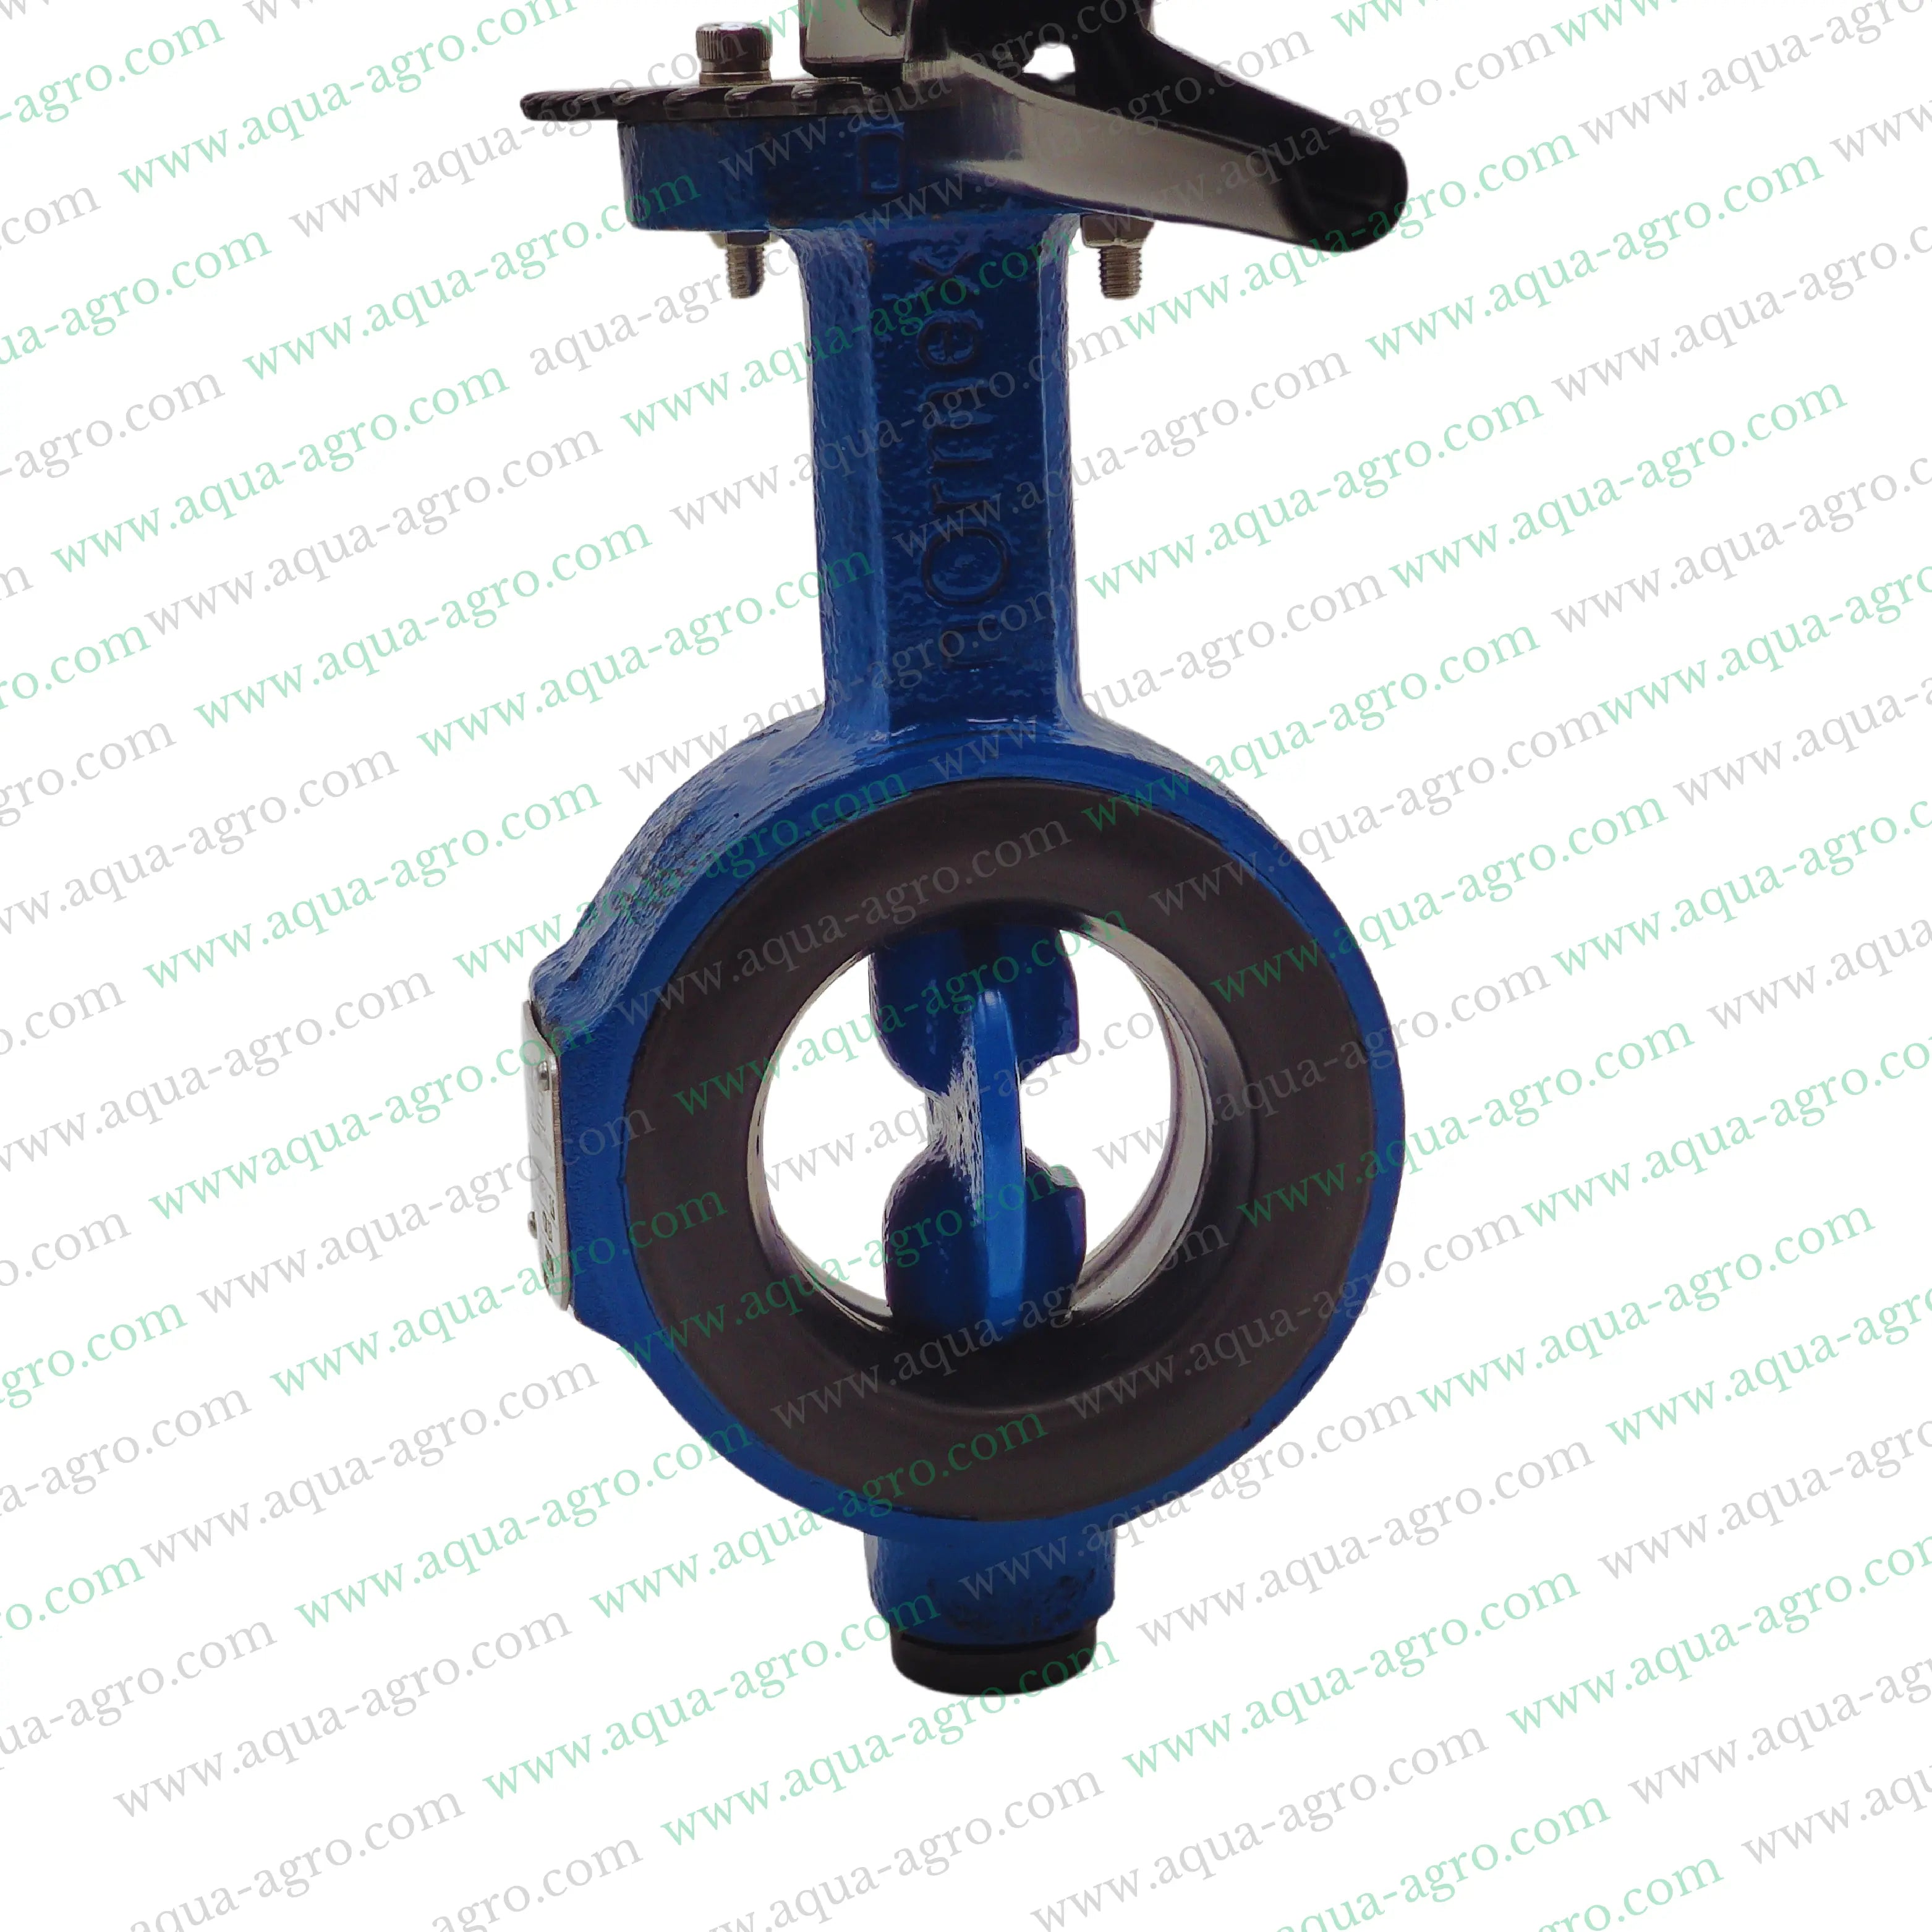 NORMEX | Valves - Butterfly Valves - Metal - C.I Body with SG Metal disc - 2.5" (65mm)